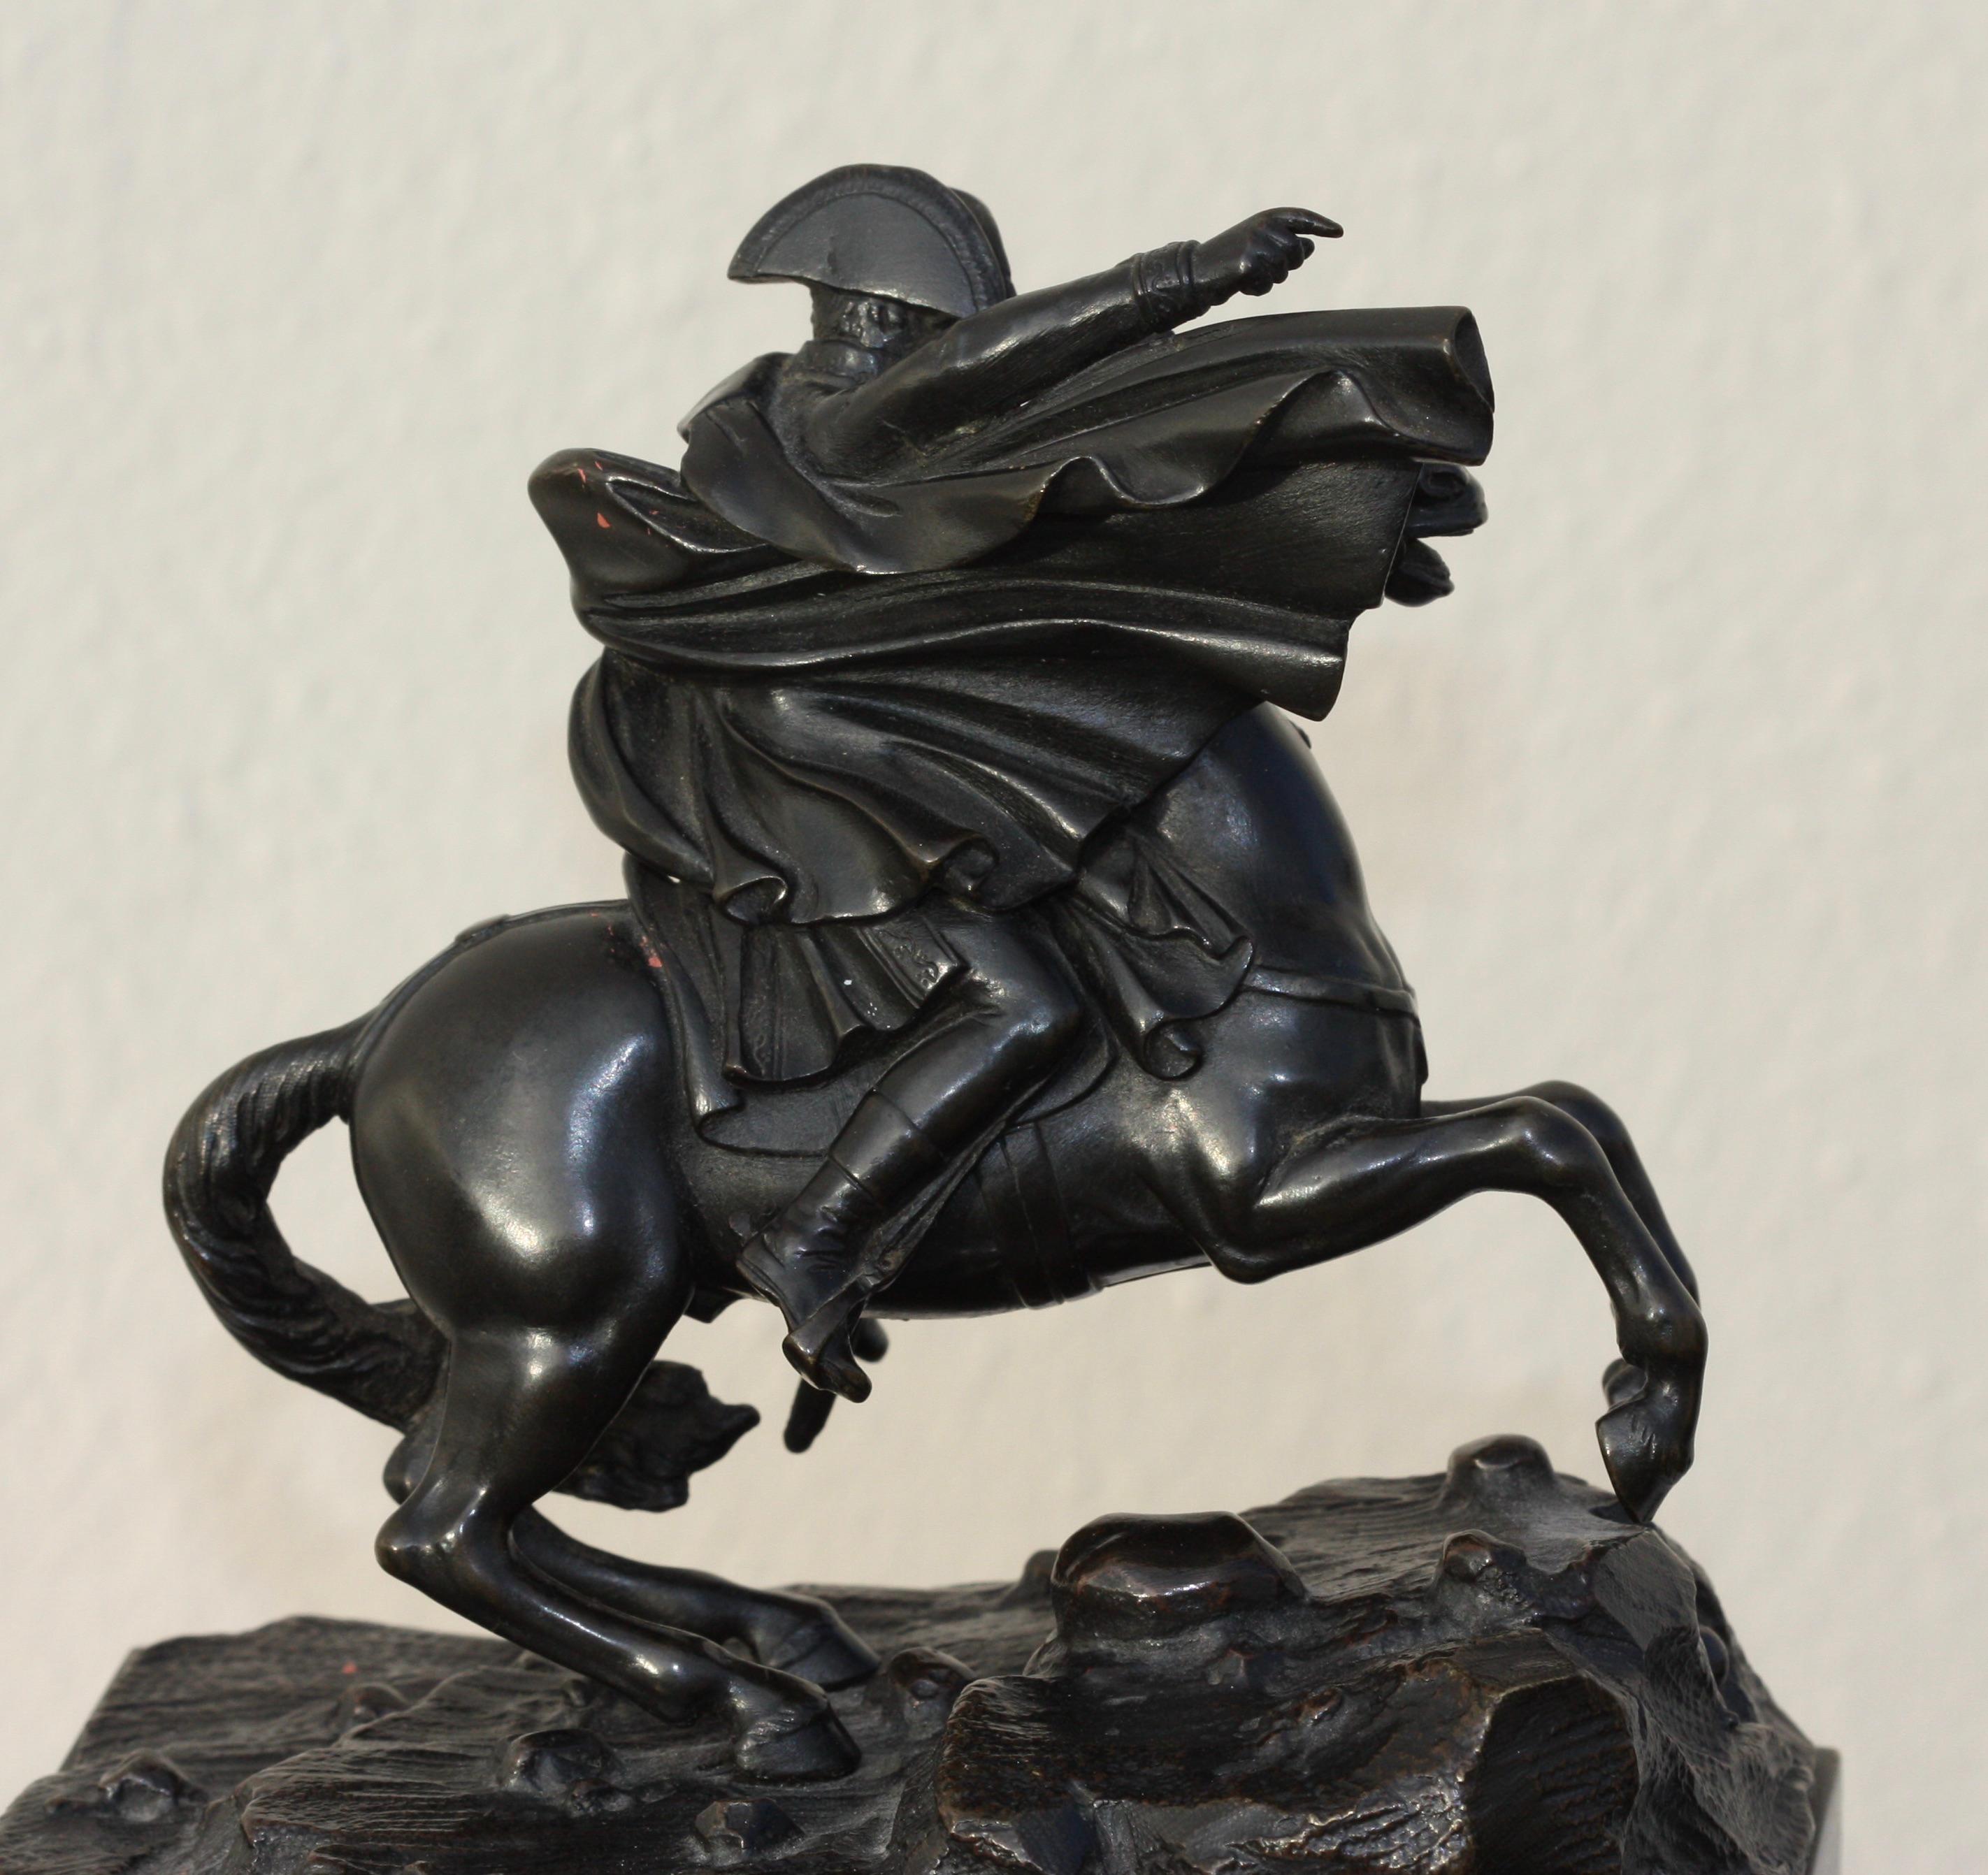 A Bronze Equestrian Figure of Napoleon I, Annibal
Signed:
Carolus Magnus,
19th century

Measures: Height 8 in. (20.32 cm.), base width 6 in. (15.24 cm.), base depth 4.37 in. (11.11 cm.)
 